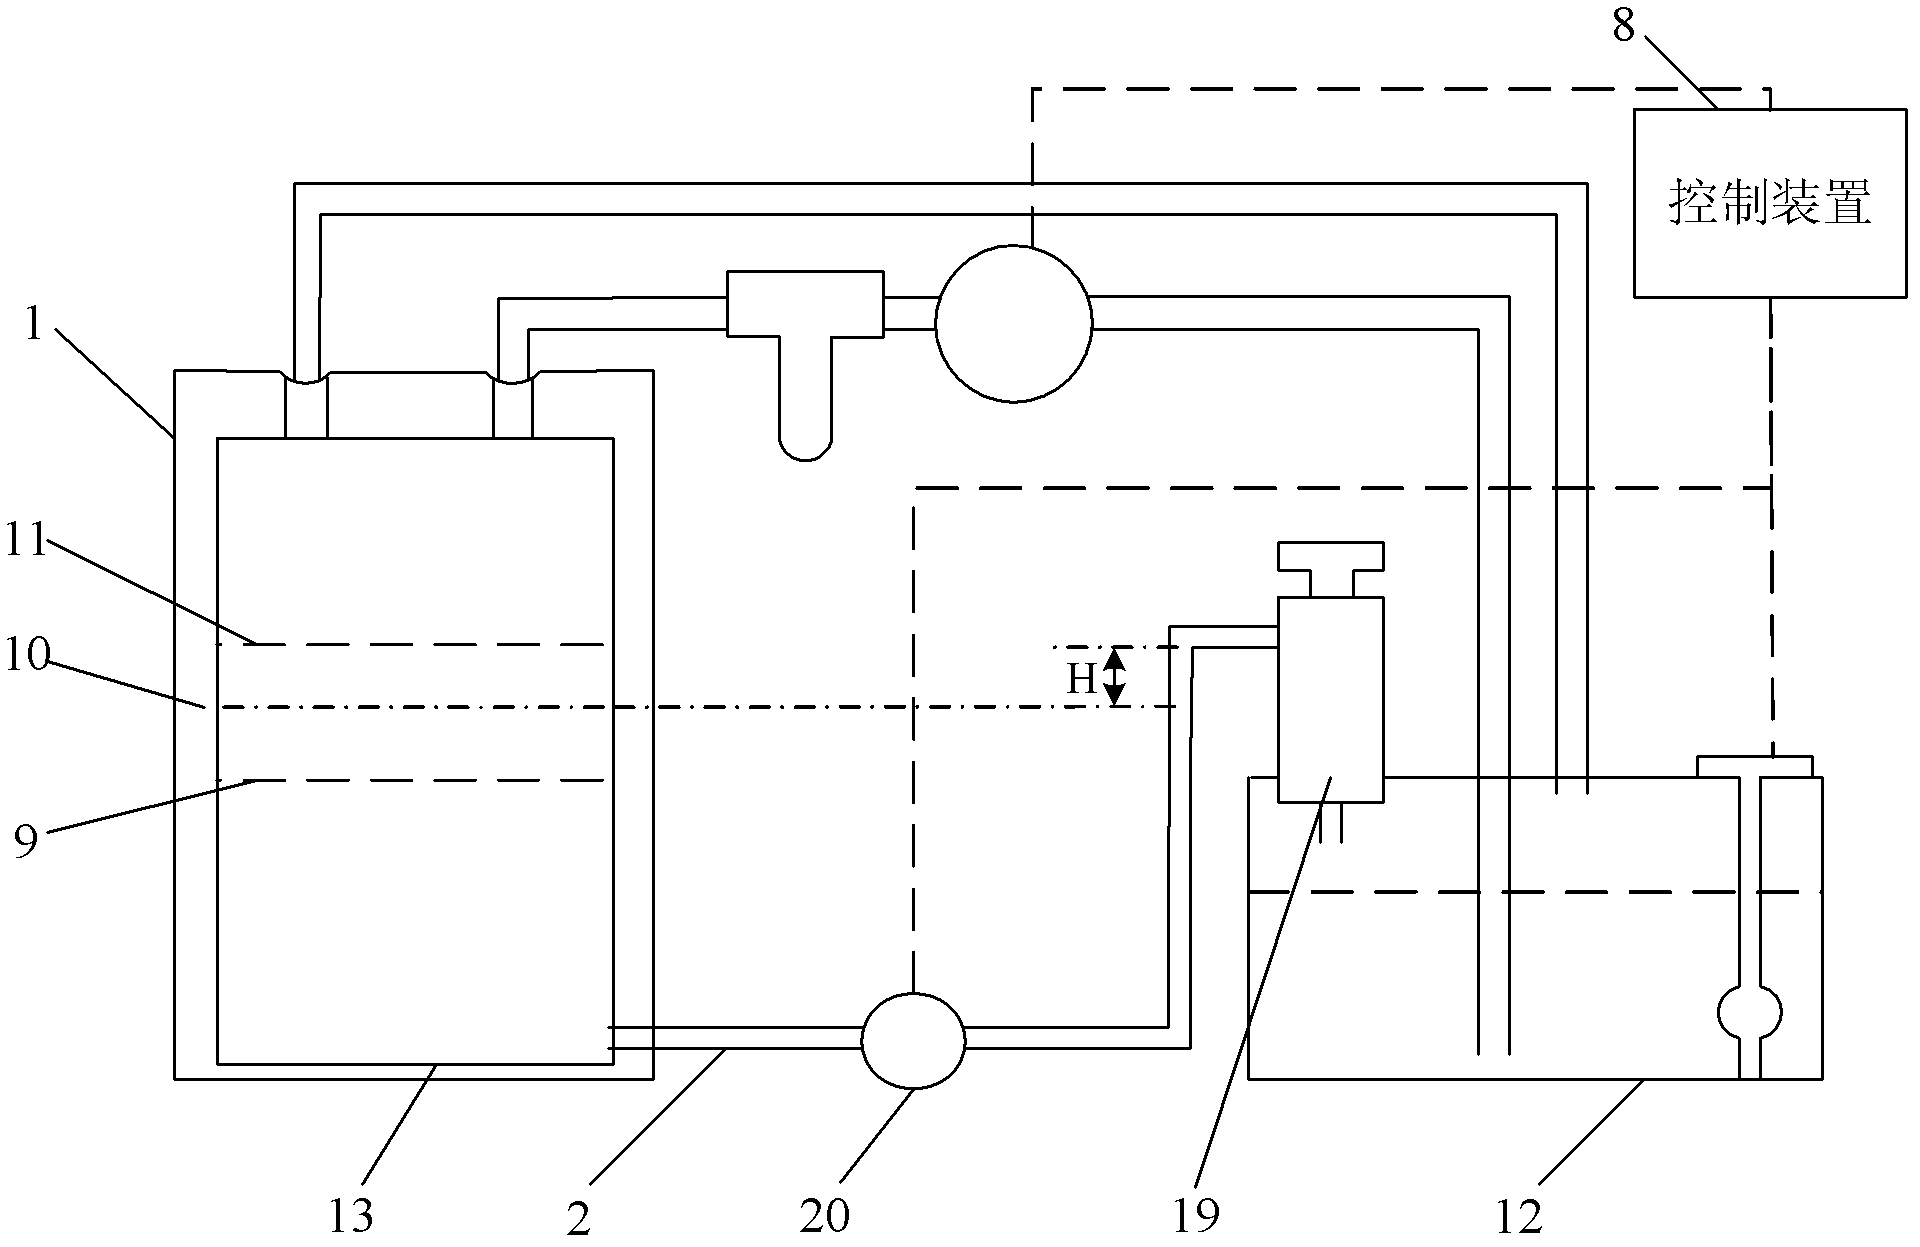 Automatic machine oil cleaning system, oil return pipeline of communicating vessel, and engine system